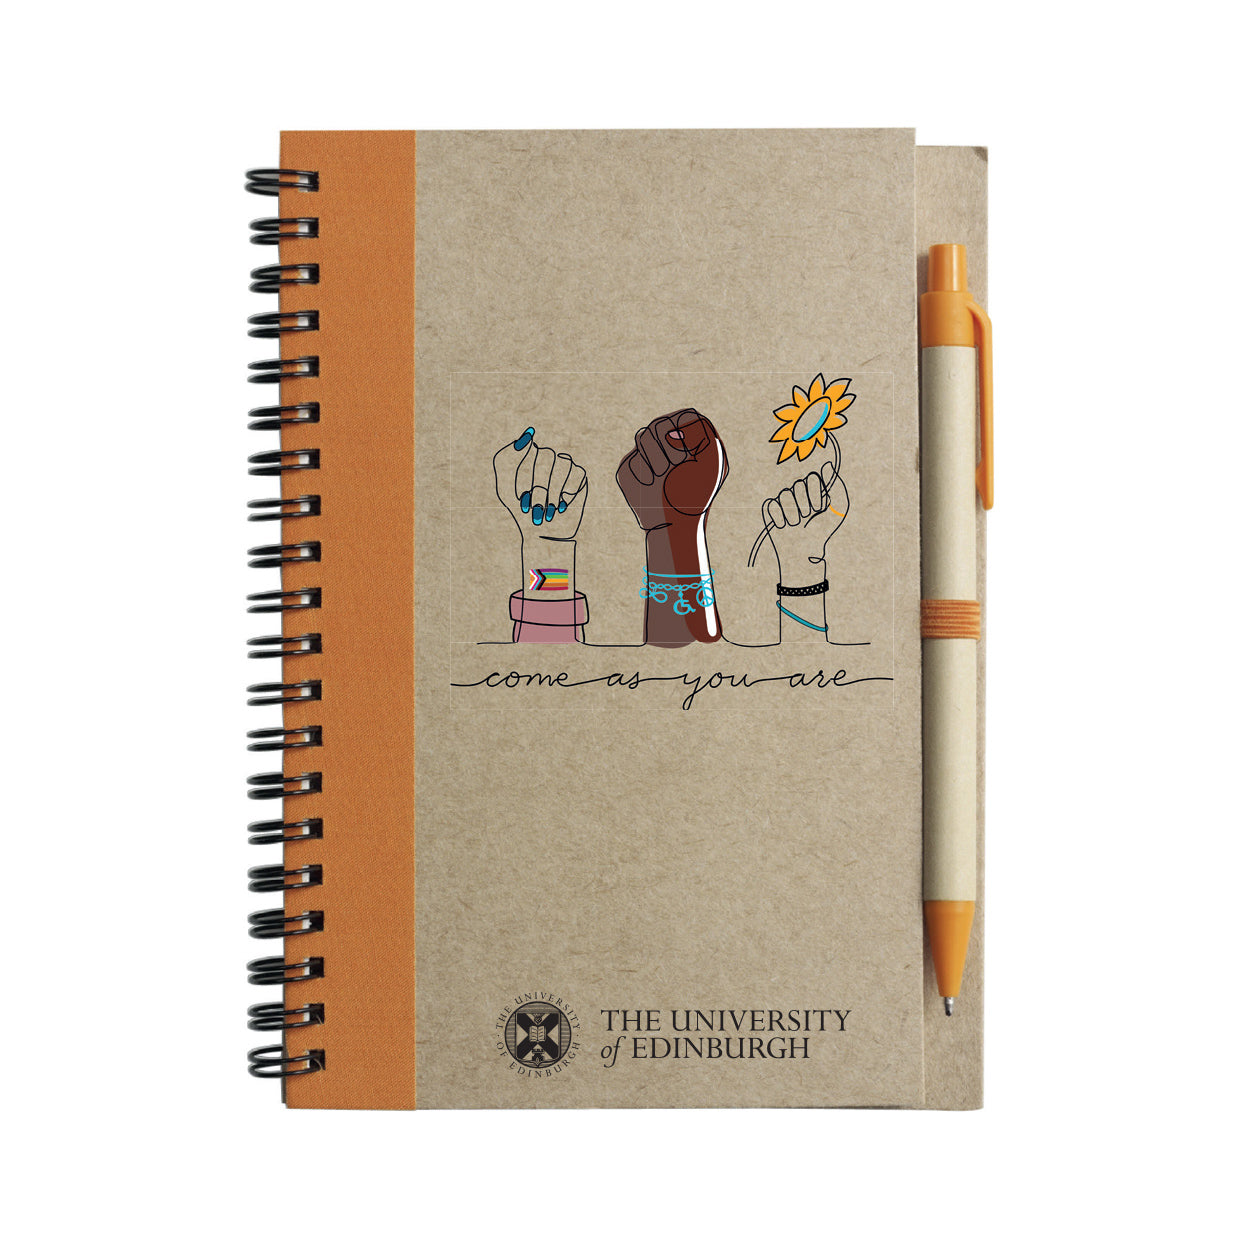 Come As You Are Notebook with Orange band.